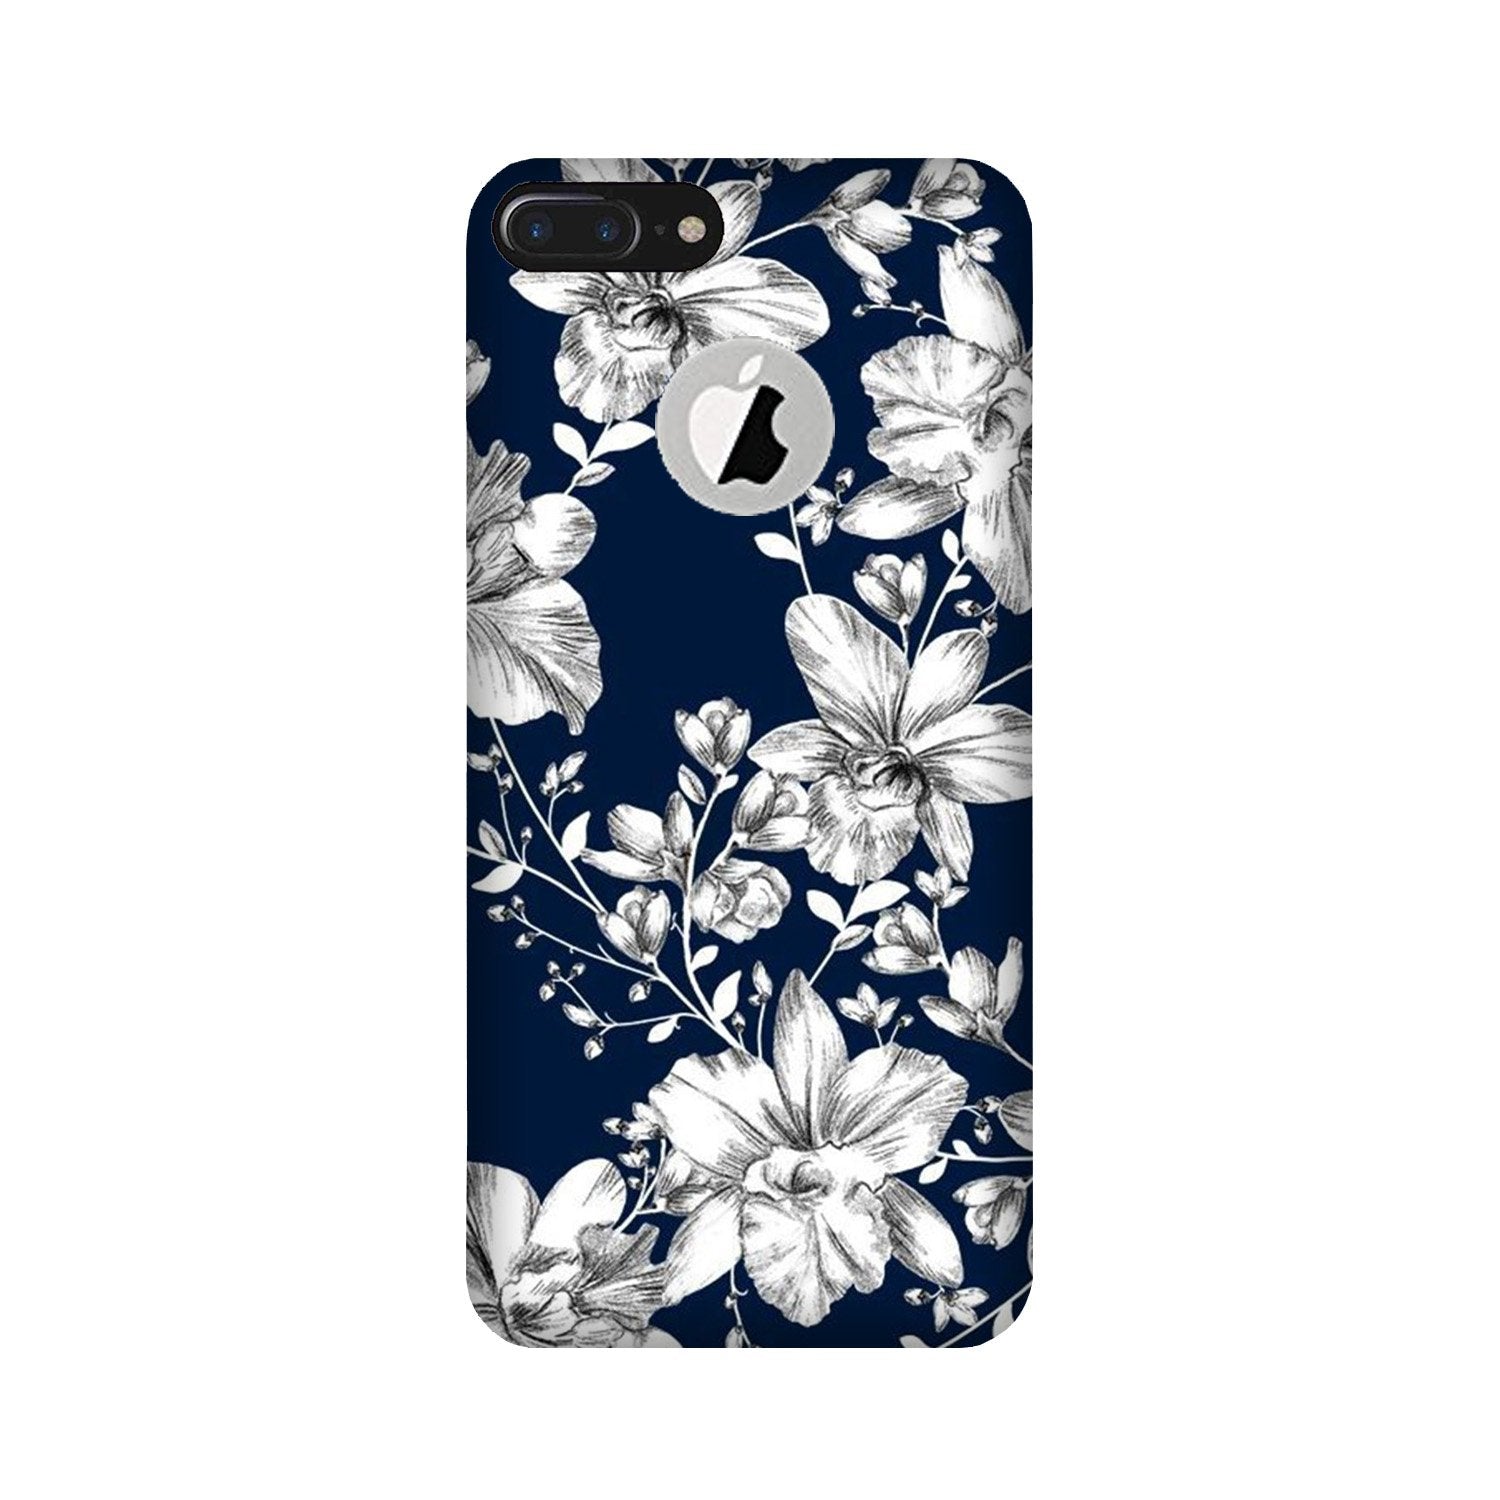 White flowers Blue Background Case for iPhone 7 Plus logo cut